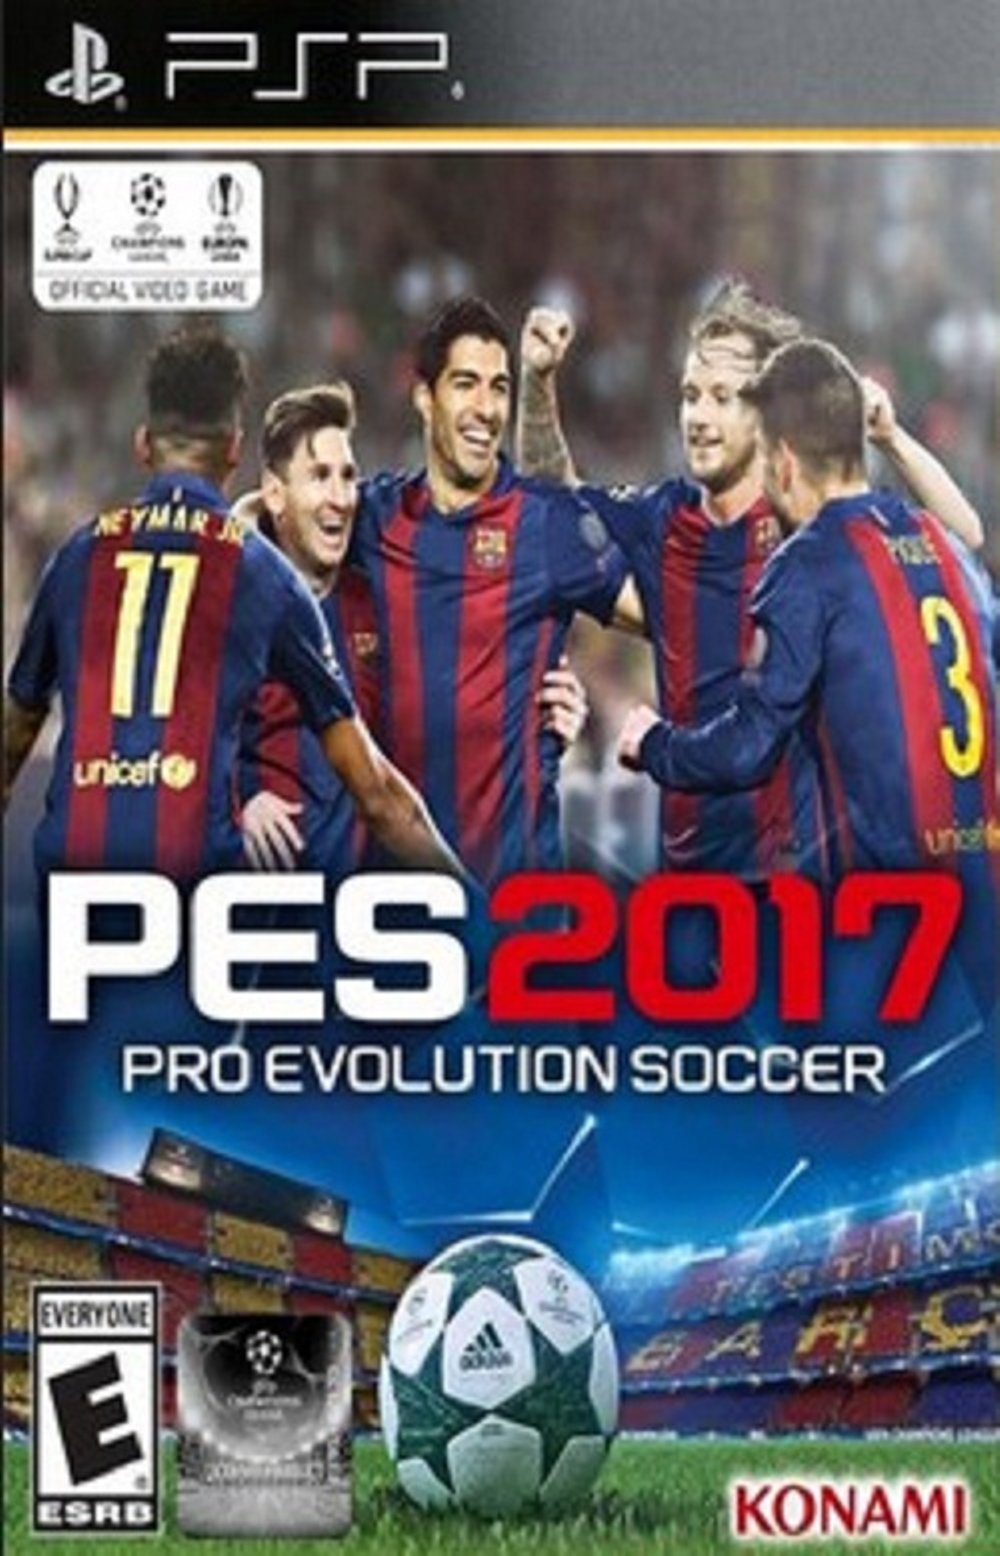 New) PPSSPP; PES 2017 Pro Evolution Soccer Guide APK + Mod for Android.